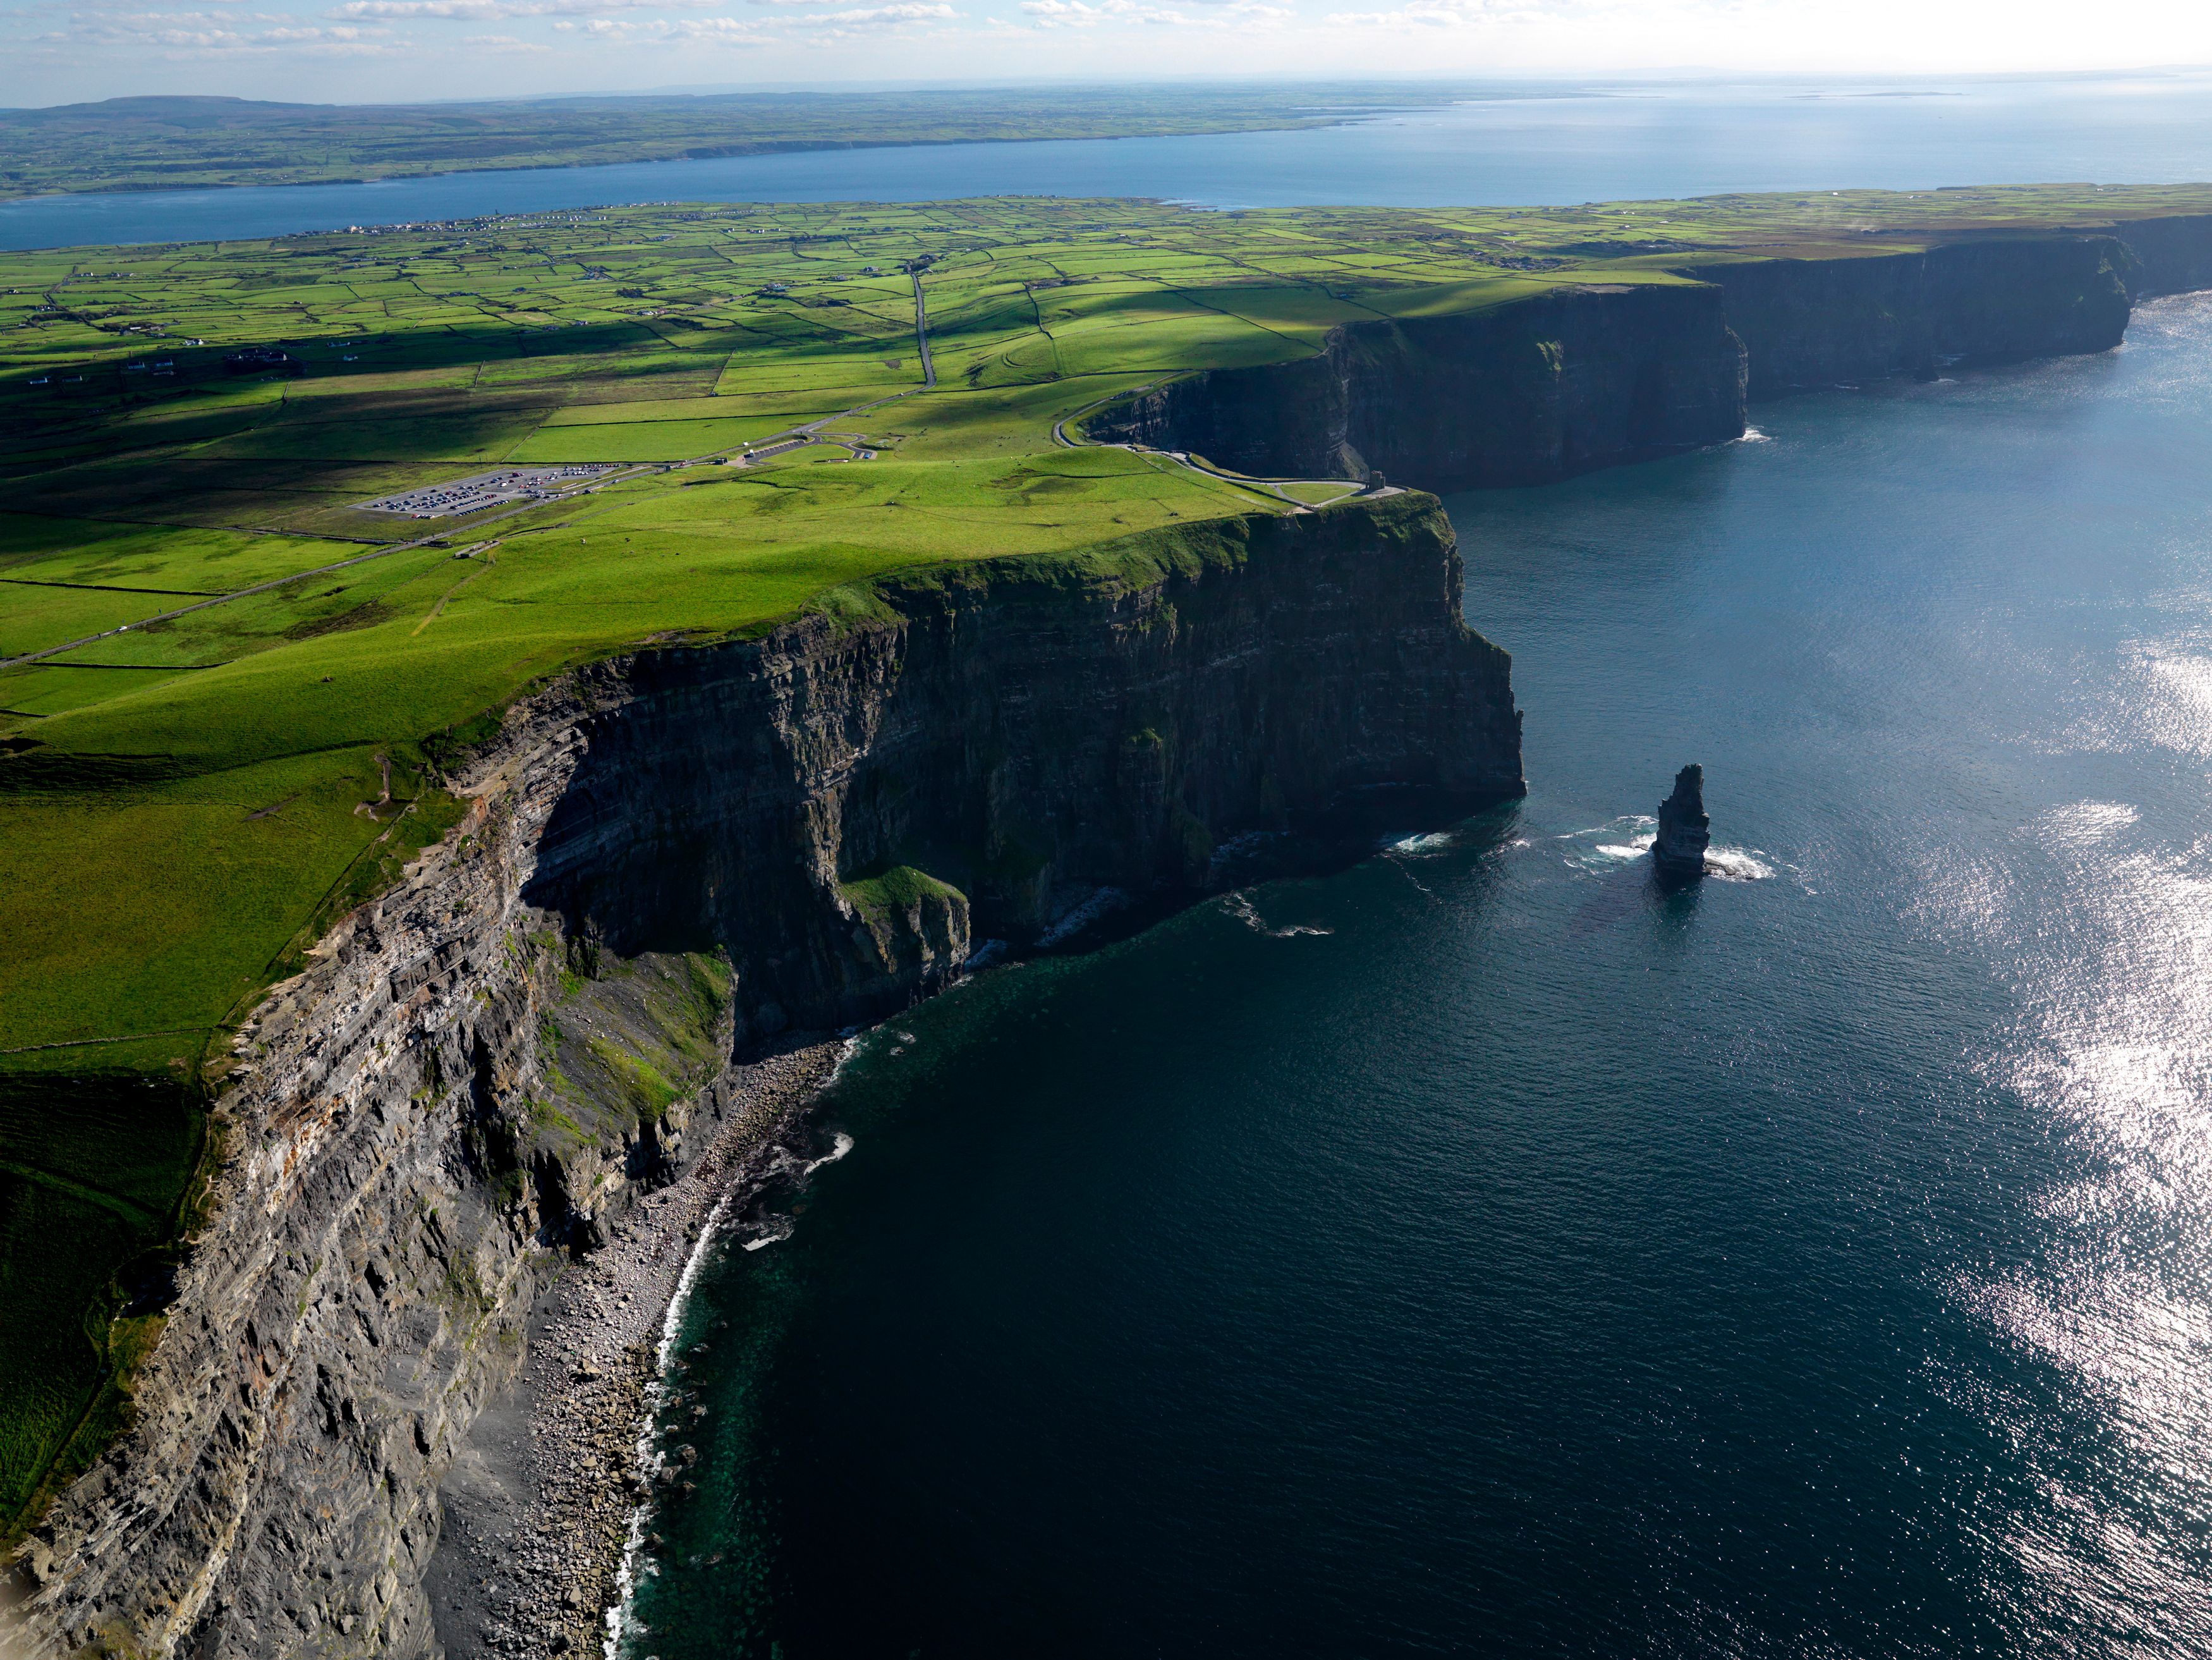 Journey to Ireland in new giant-screen movie opening Sept. 20 at the Science Center